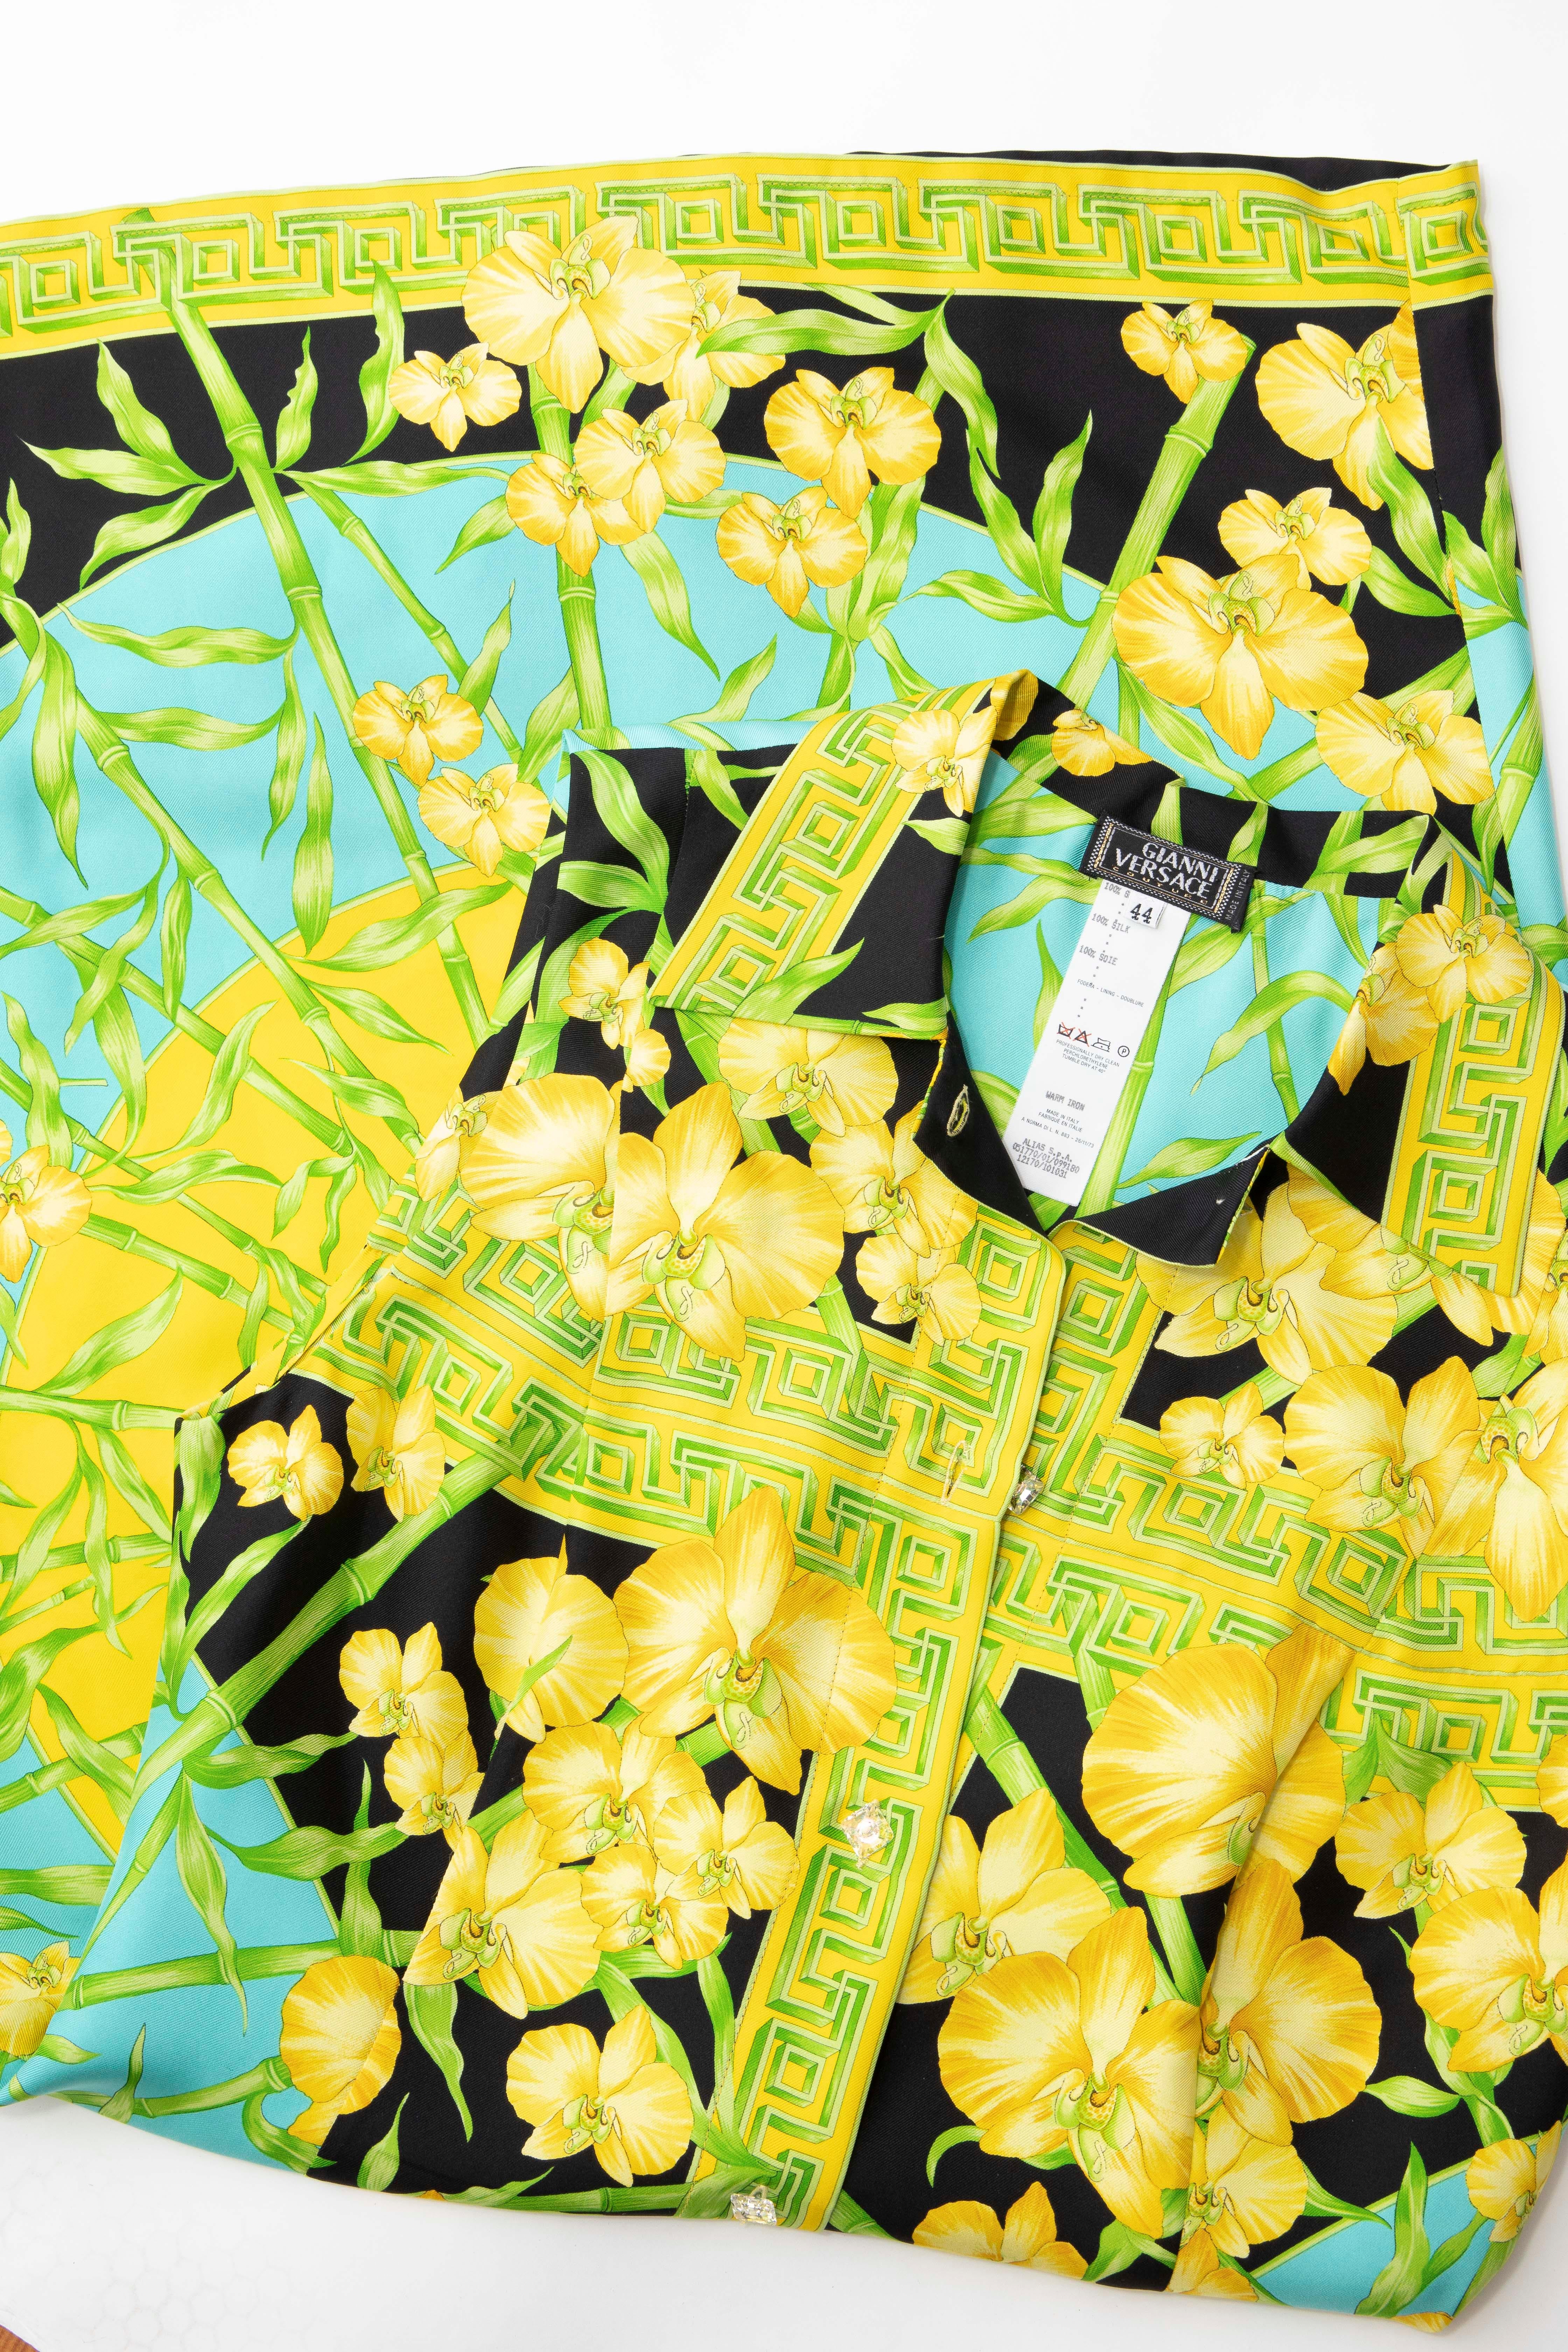 Gianni Versace Couture Silk Printed Yellow Orchids Sheath Dress, Circa: 1990's 7